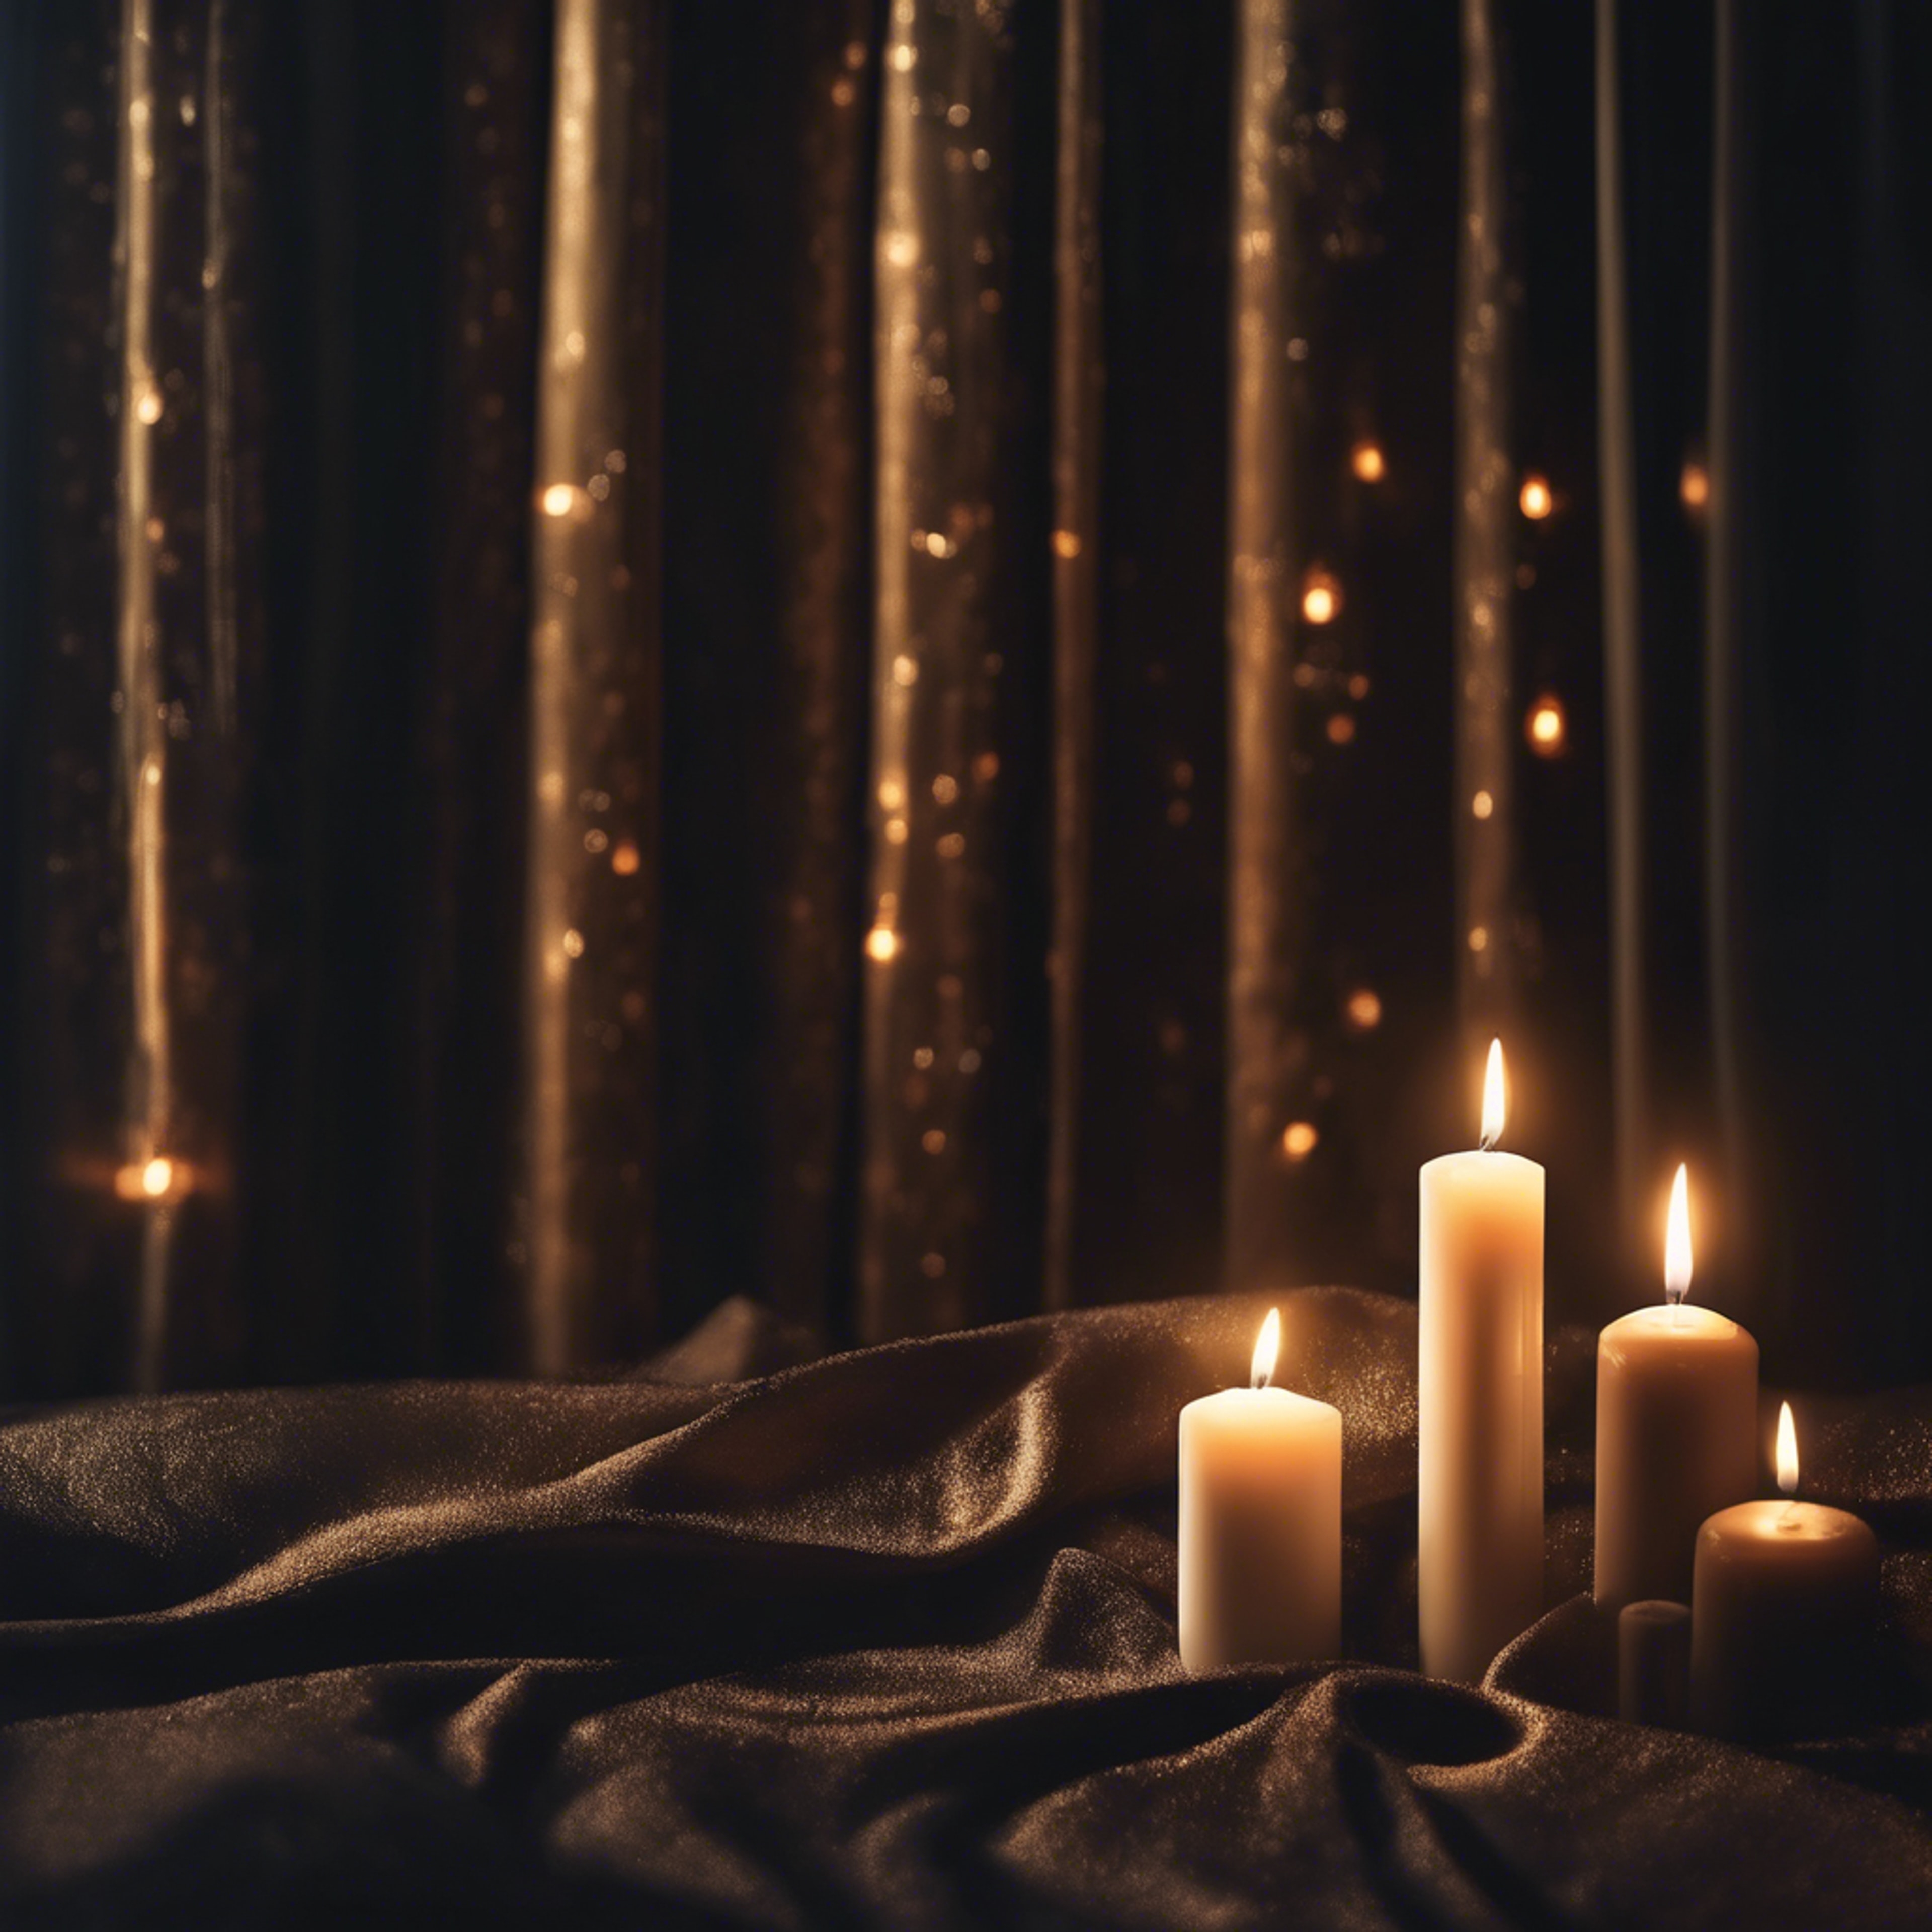 Black velvet curtains drawn aside to reveal an elegantly decorated room bathed in candlelight.壁紙[ccdcc4a0498b4f21956f]